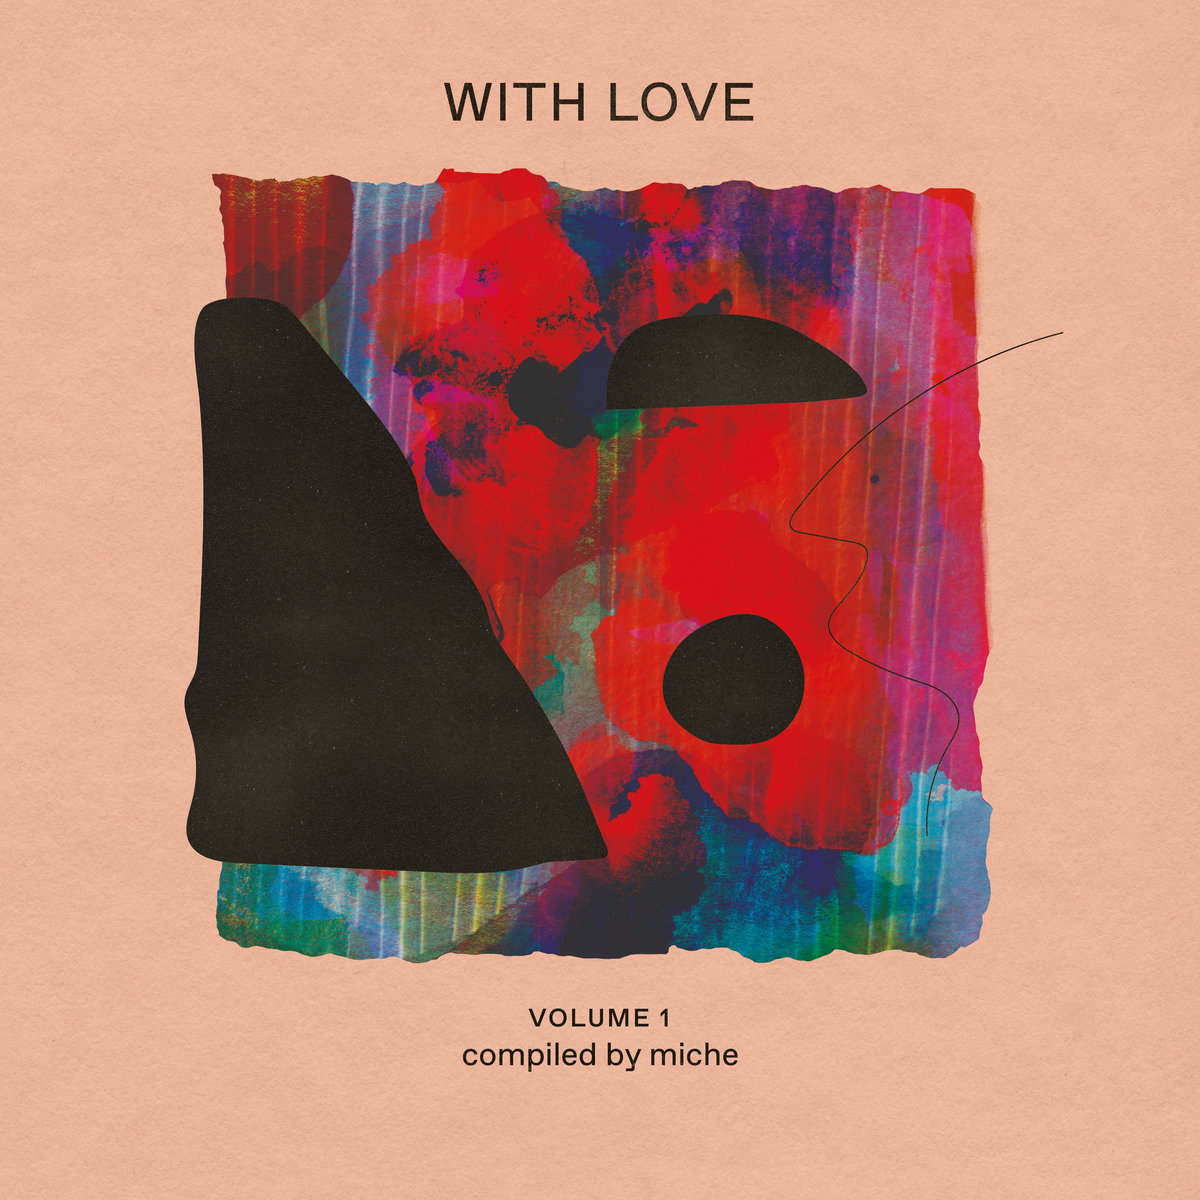 V A - WITH LOVE VOLUME 1 (COMPILED BY MICHE) - LP